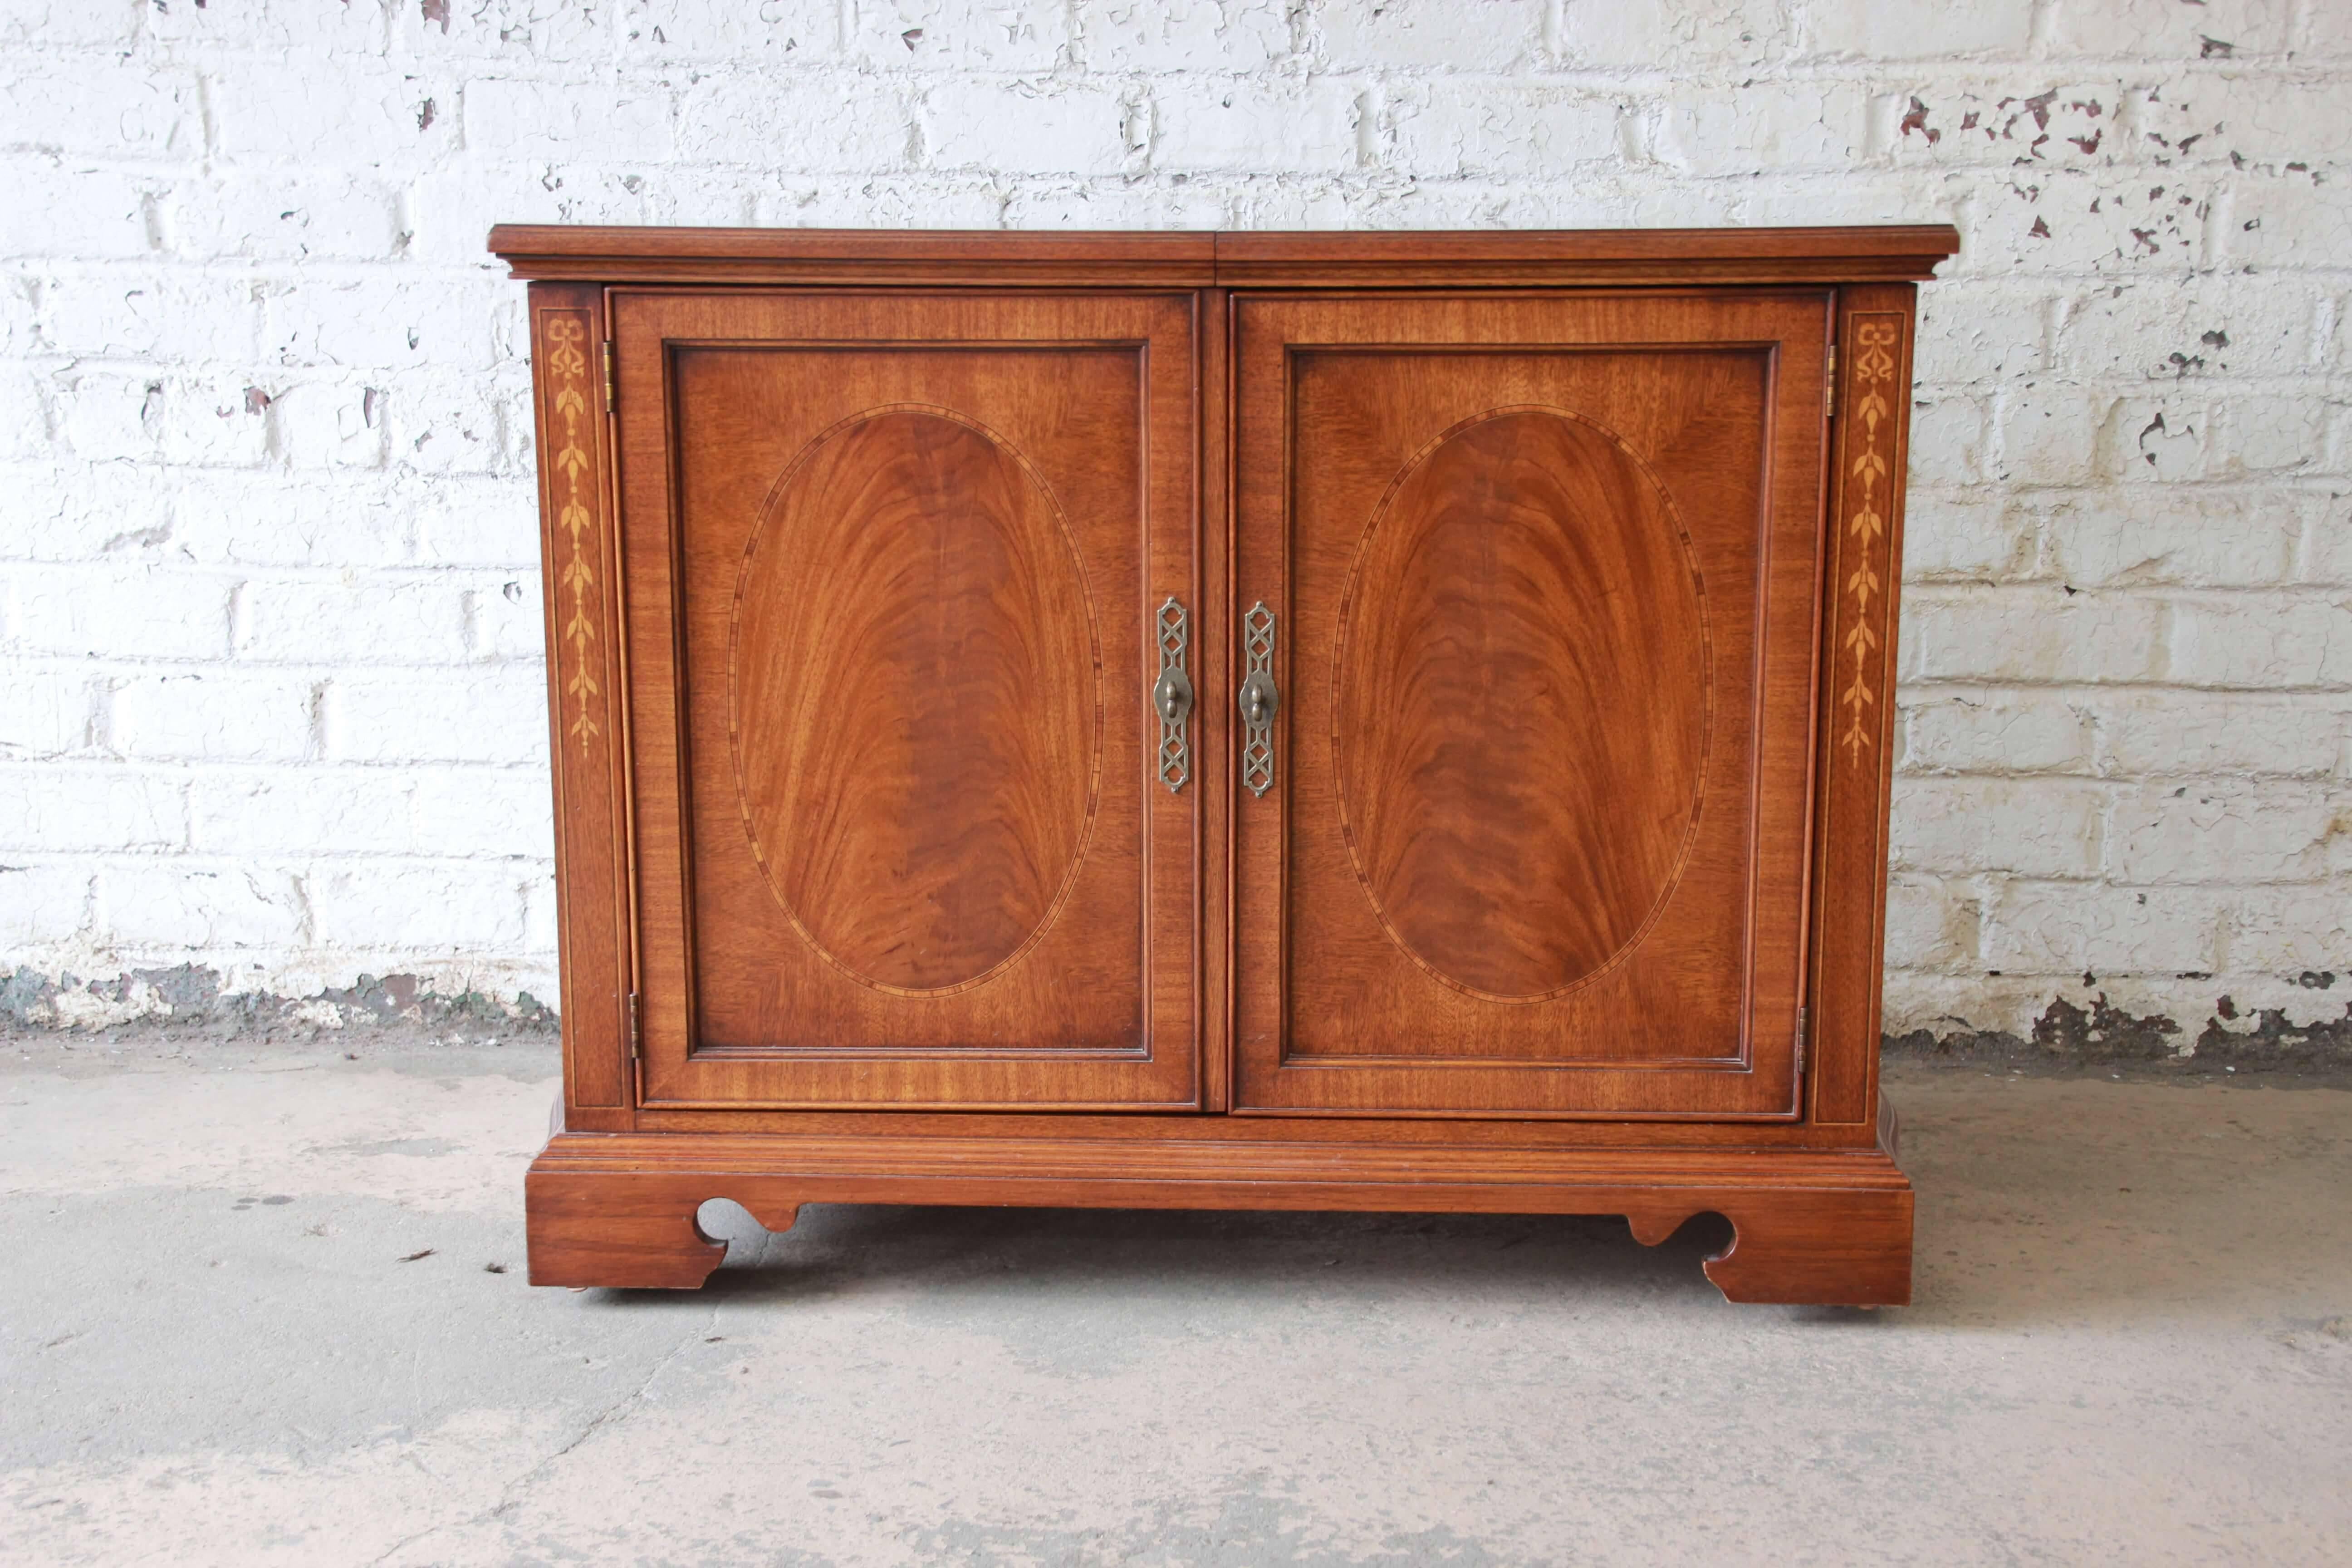 Offering a very nice vintage Drexel Heritage buffet, server or bar. The inlaid and flame mahogany server sits on smooth rolling casters. The top slides to reveal a black laminate extending the server to 65.63